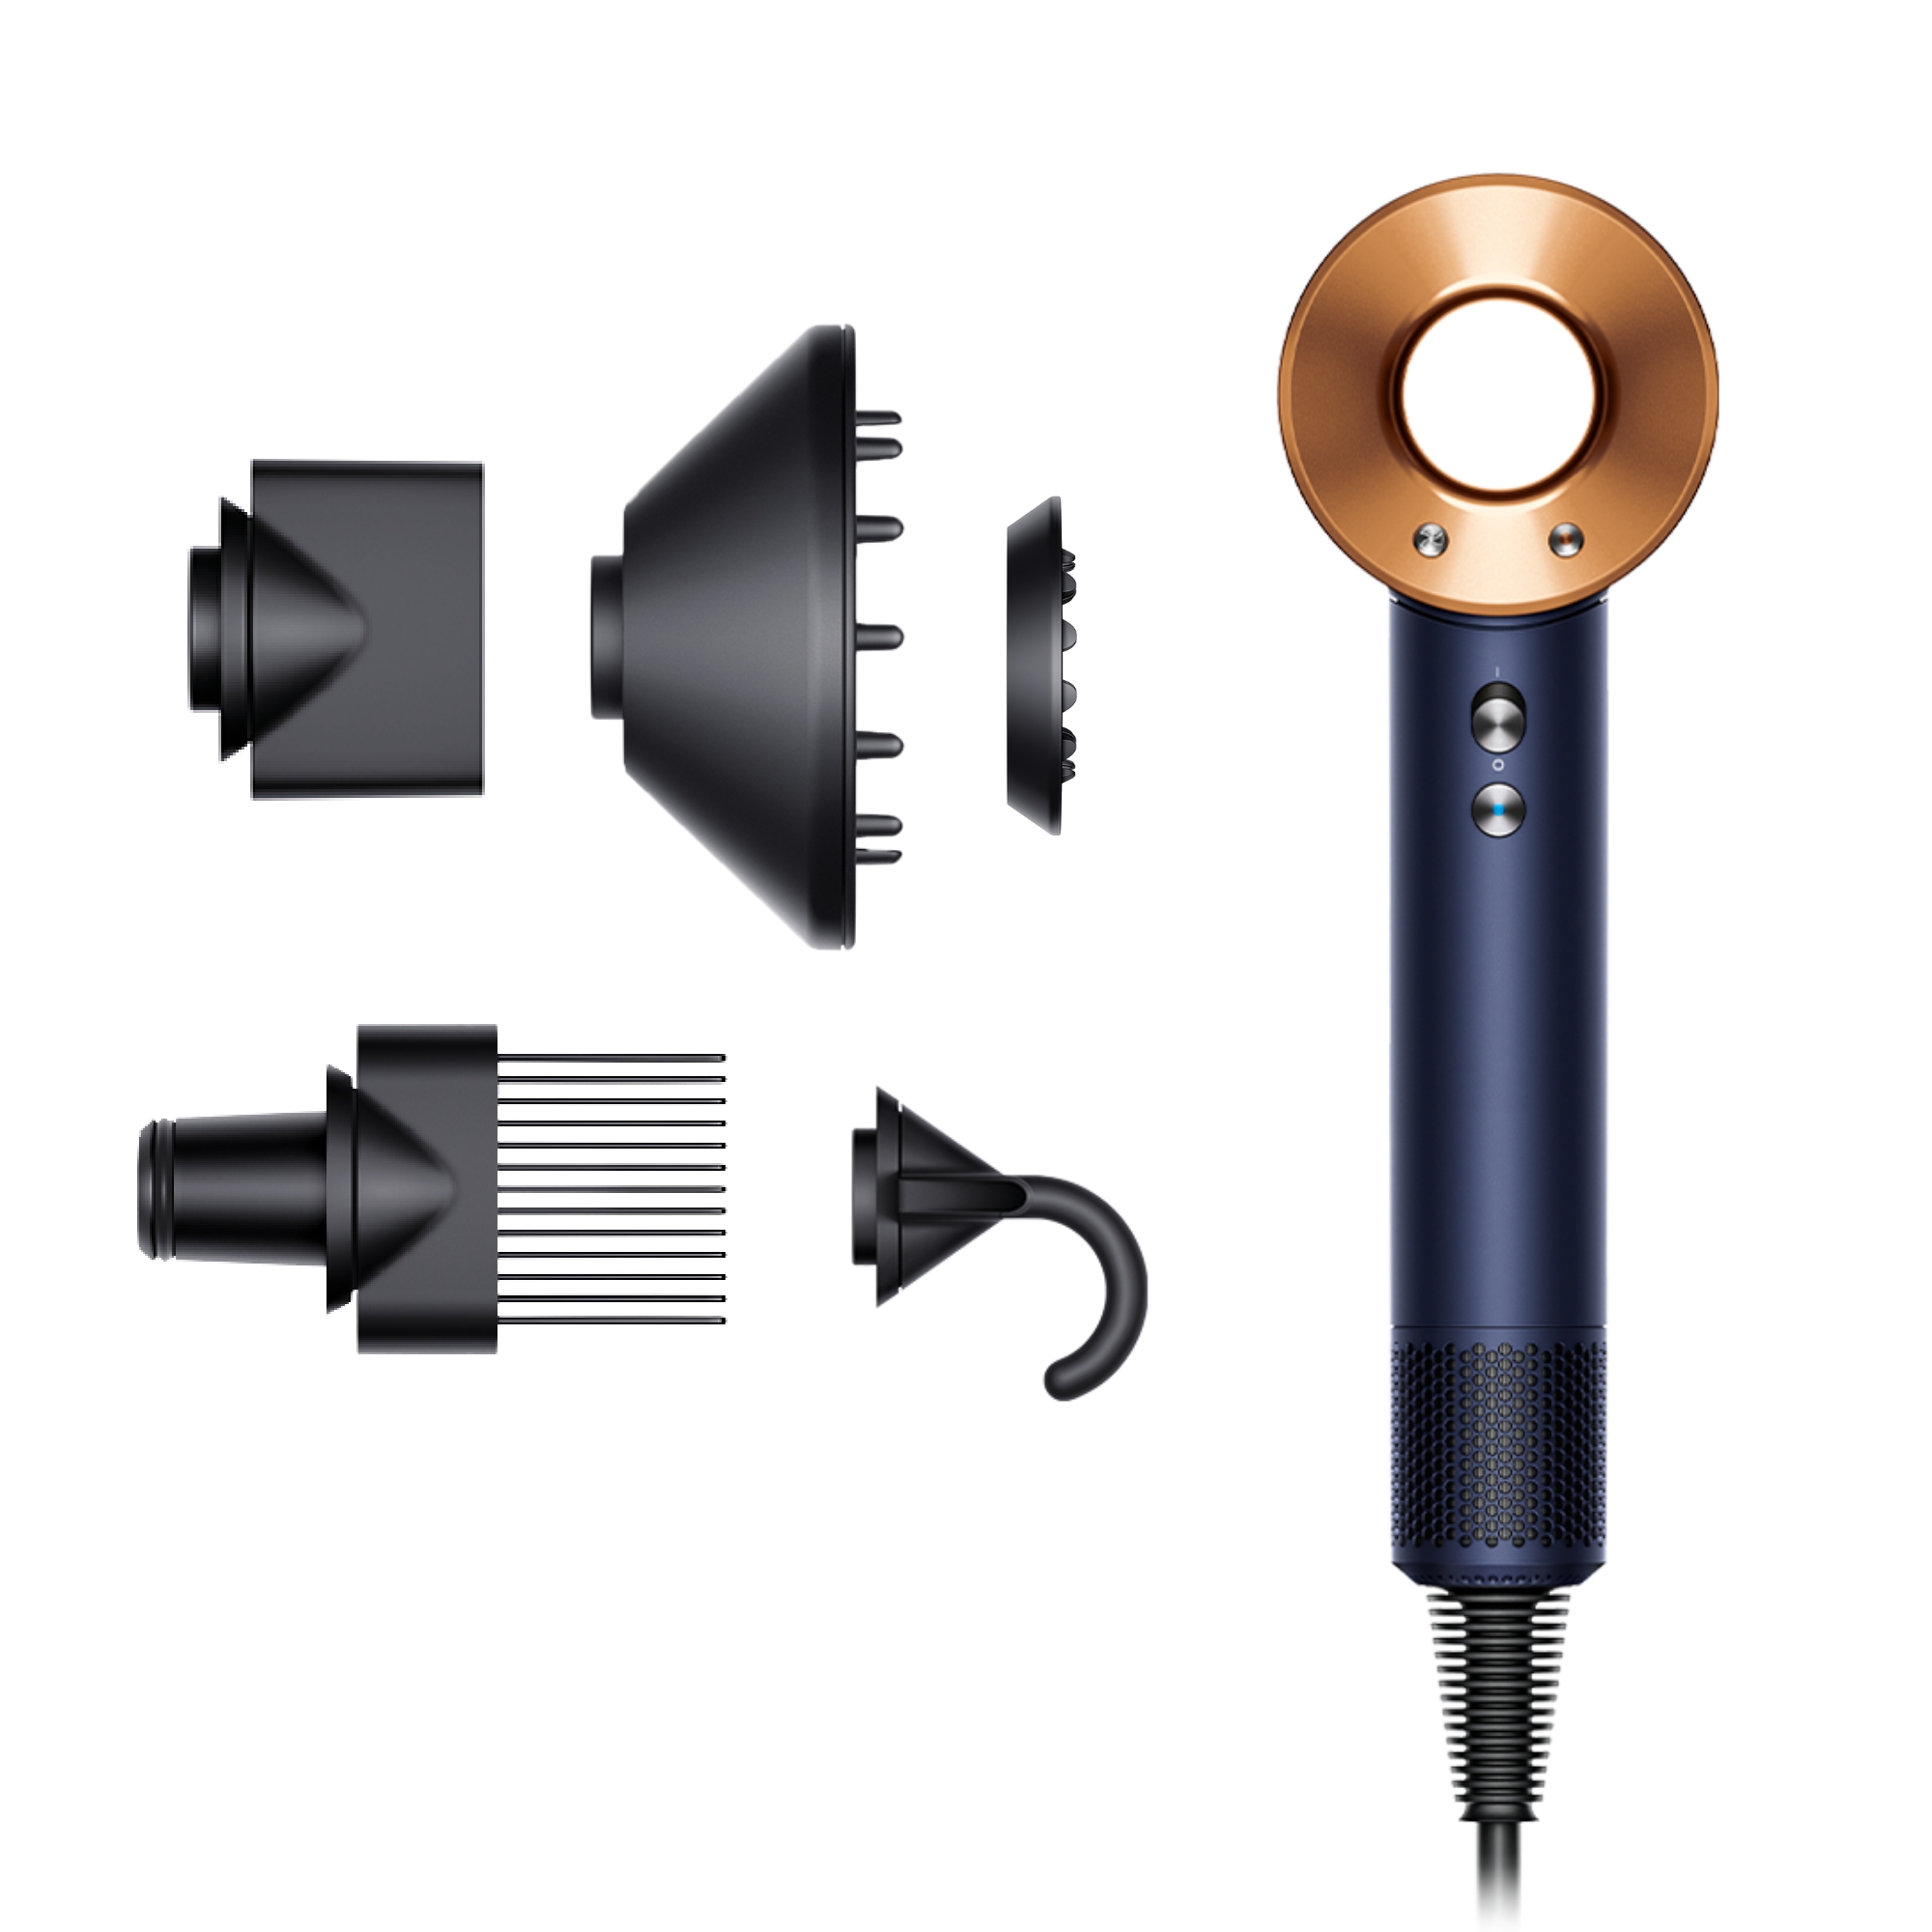 Dyson Supersonic Latest Gen Hair Dryer Blue, Silver, or White)